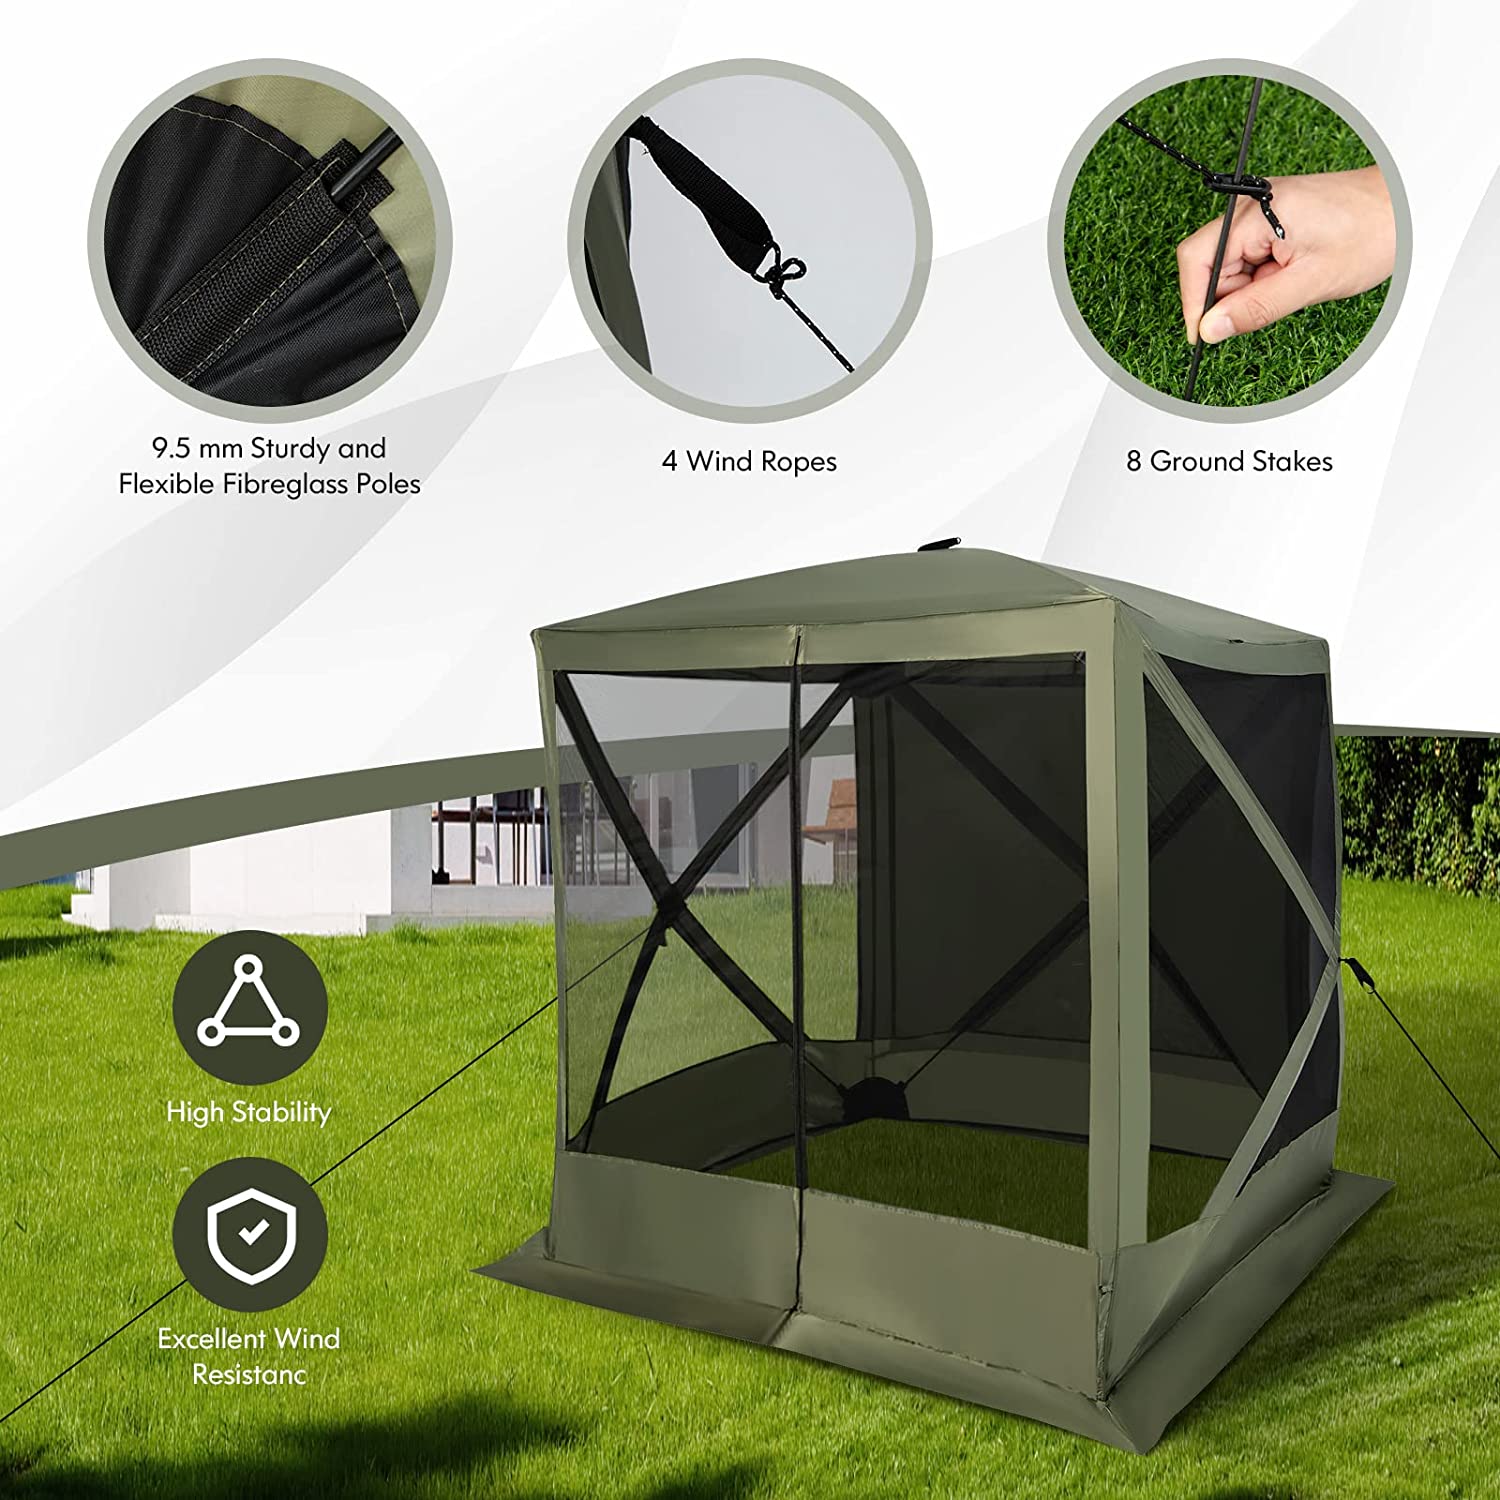 Chairliving 6.7 x 6.7 Feet Pop Up Gazebo Portable Screen Tent Instant Canopy Shelter with Netting and Carry Bag for Camping